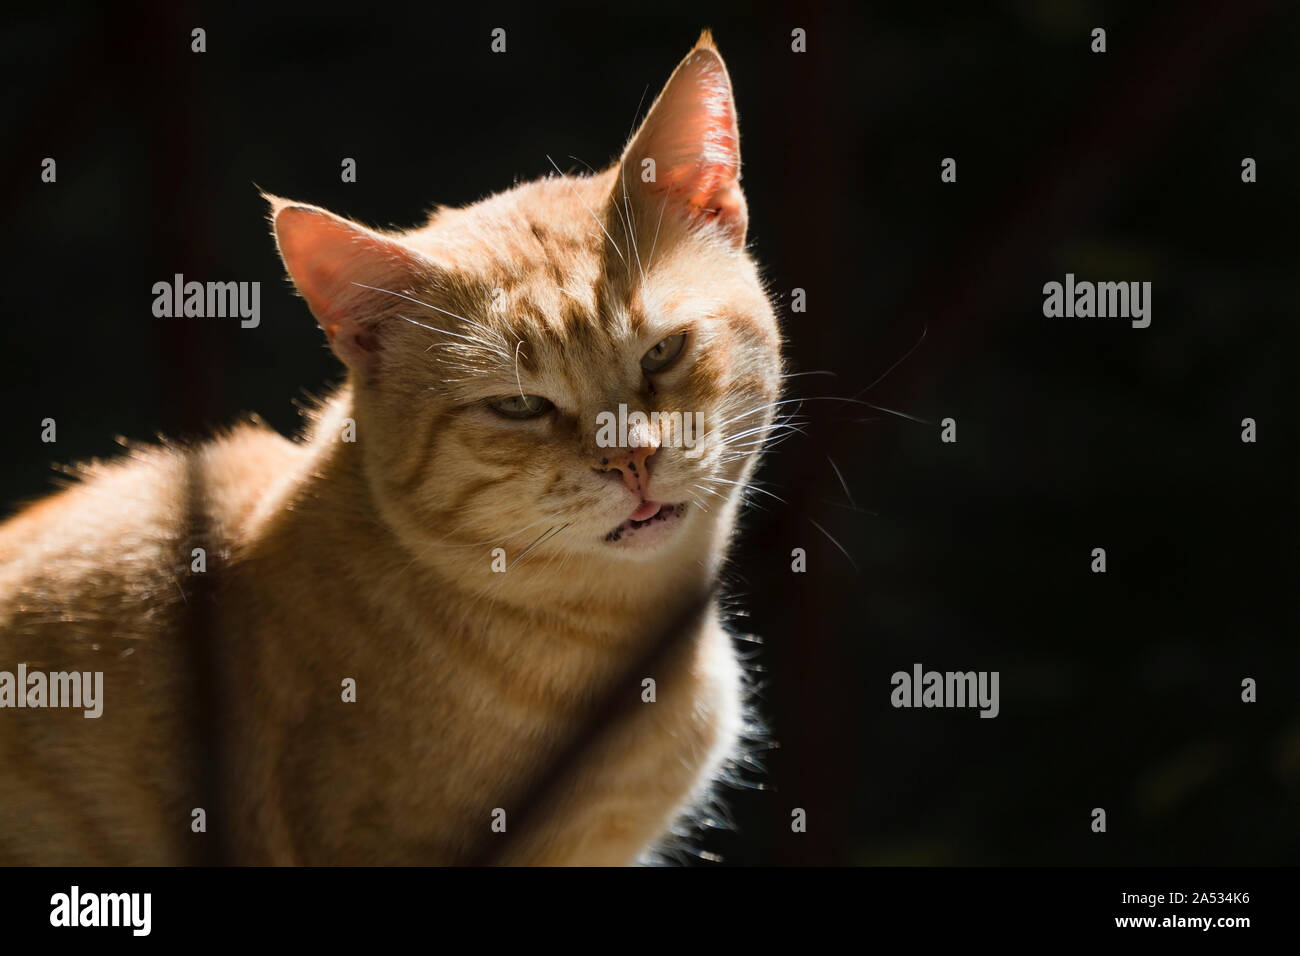 Ginger tomcat with shadows is looks like a pirate cat. Stock Photo